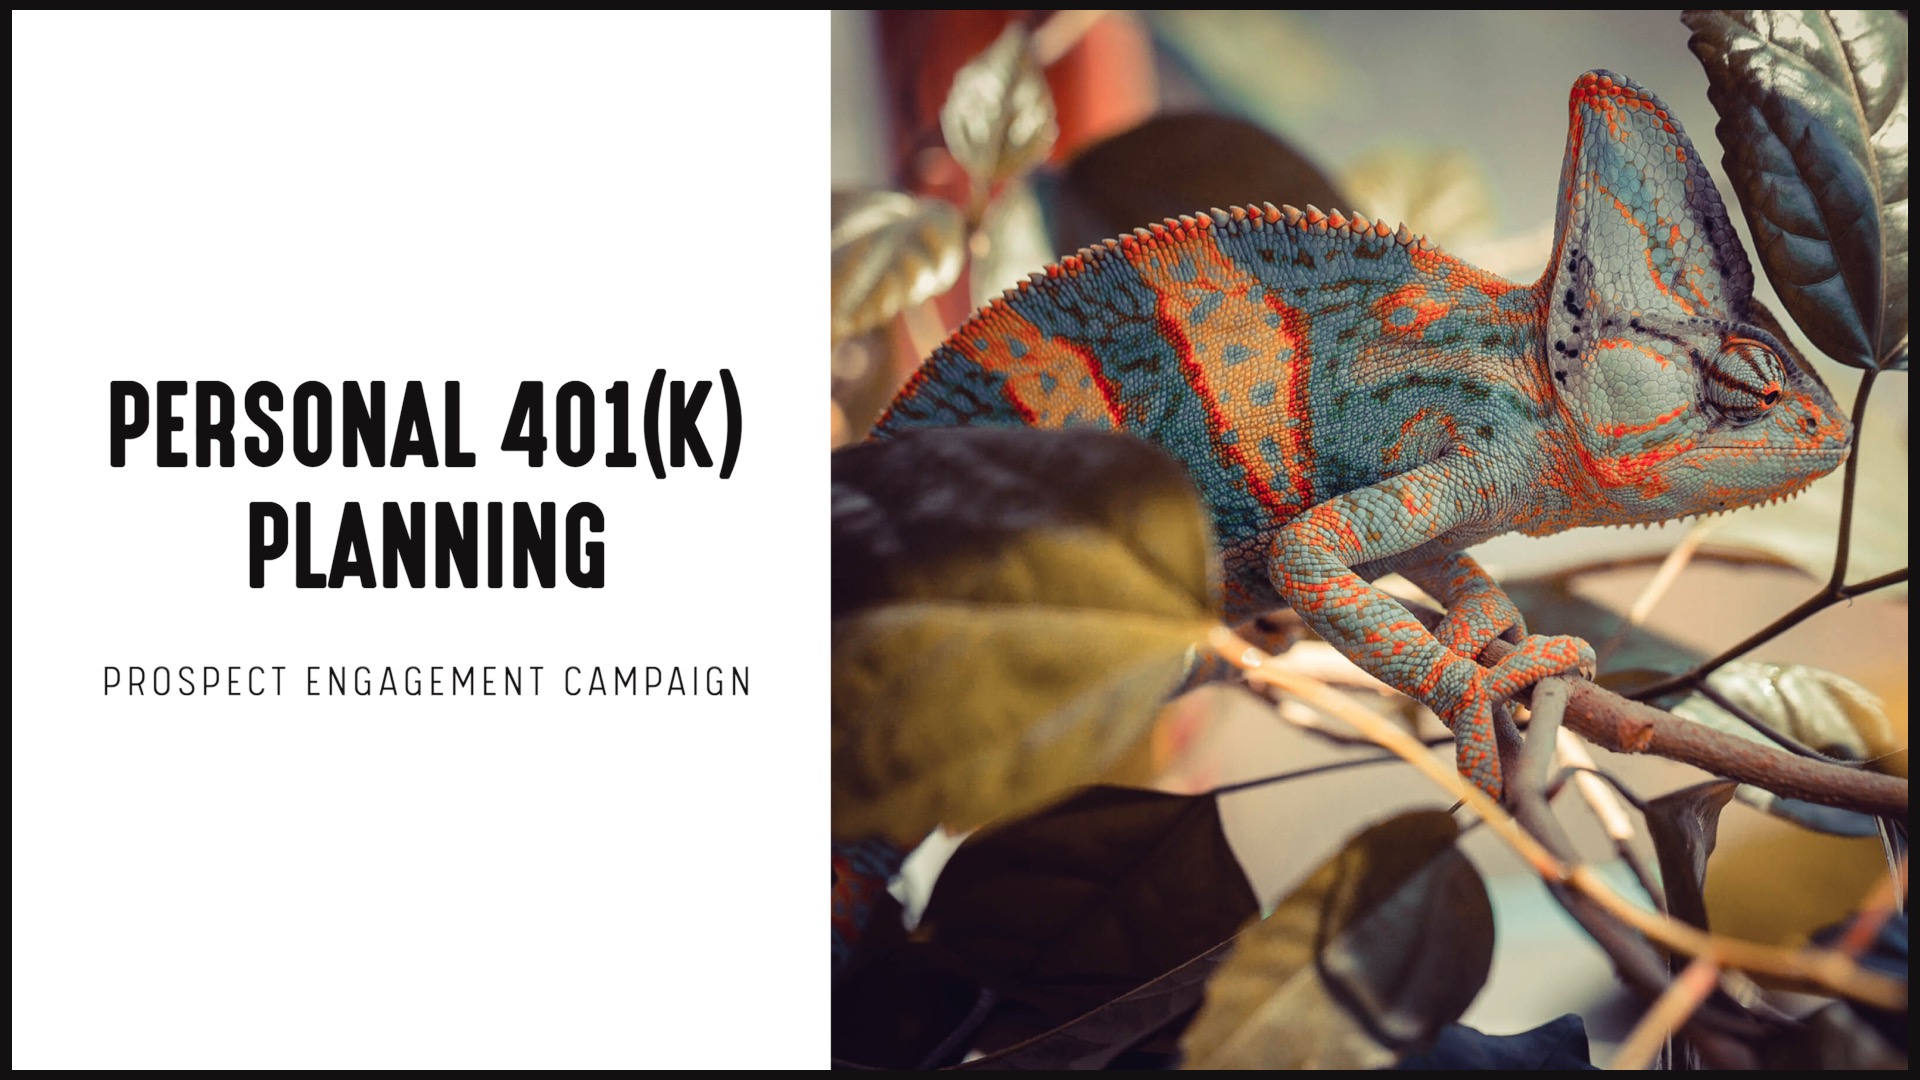 [NEW] Prospect Engagement Campaign | Personal 401(k) Planning